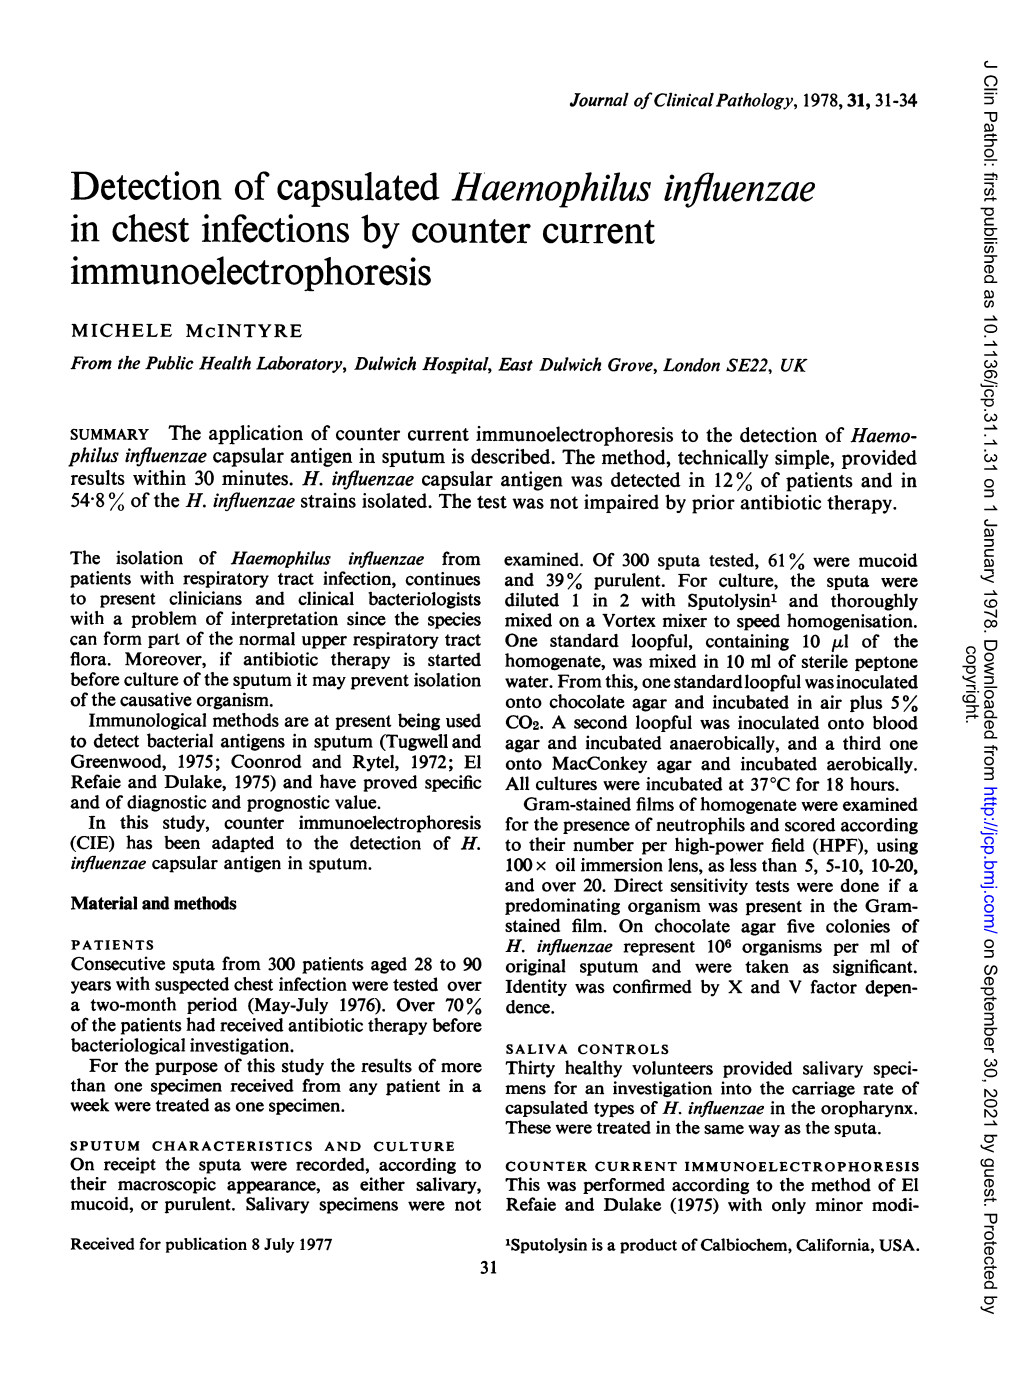 Detection of Capsulated Haeinophilus Influenzae in Chest Infections by Counter Current Immunoelectrophoresis